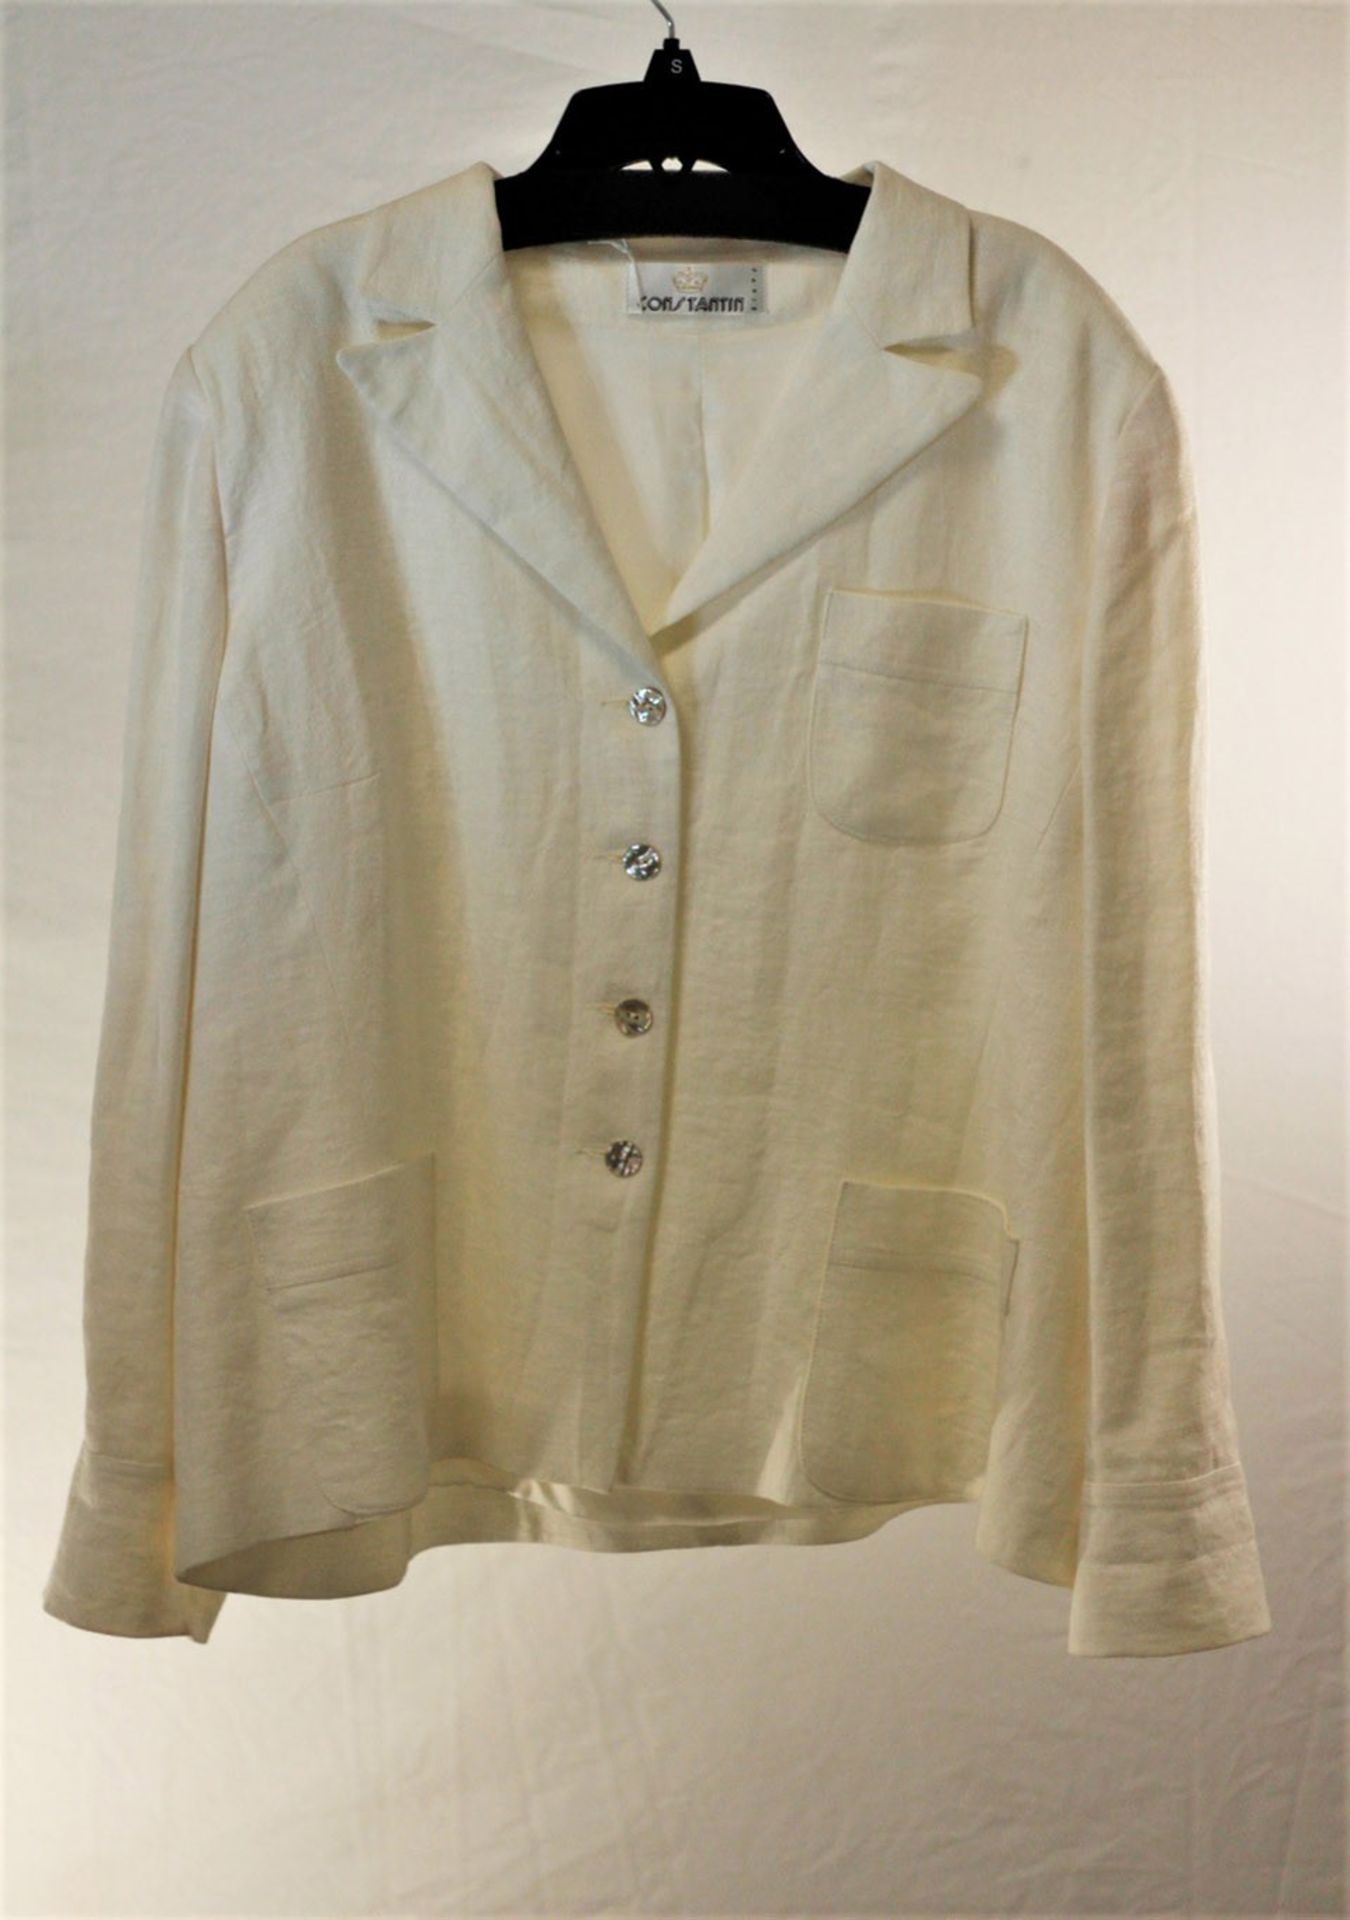 1 x Constantin Paris Cream Jacket - Size: 24 - Material: 100% Linen - From a High End Clothing